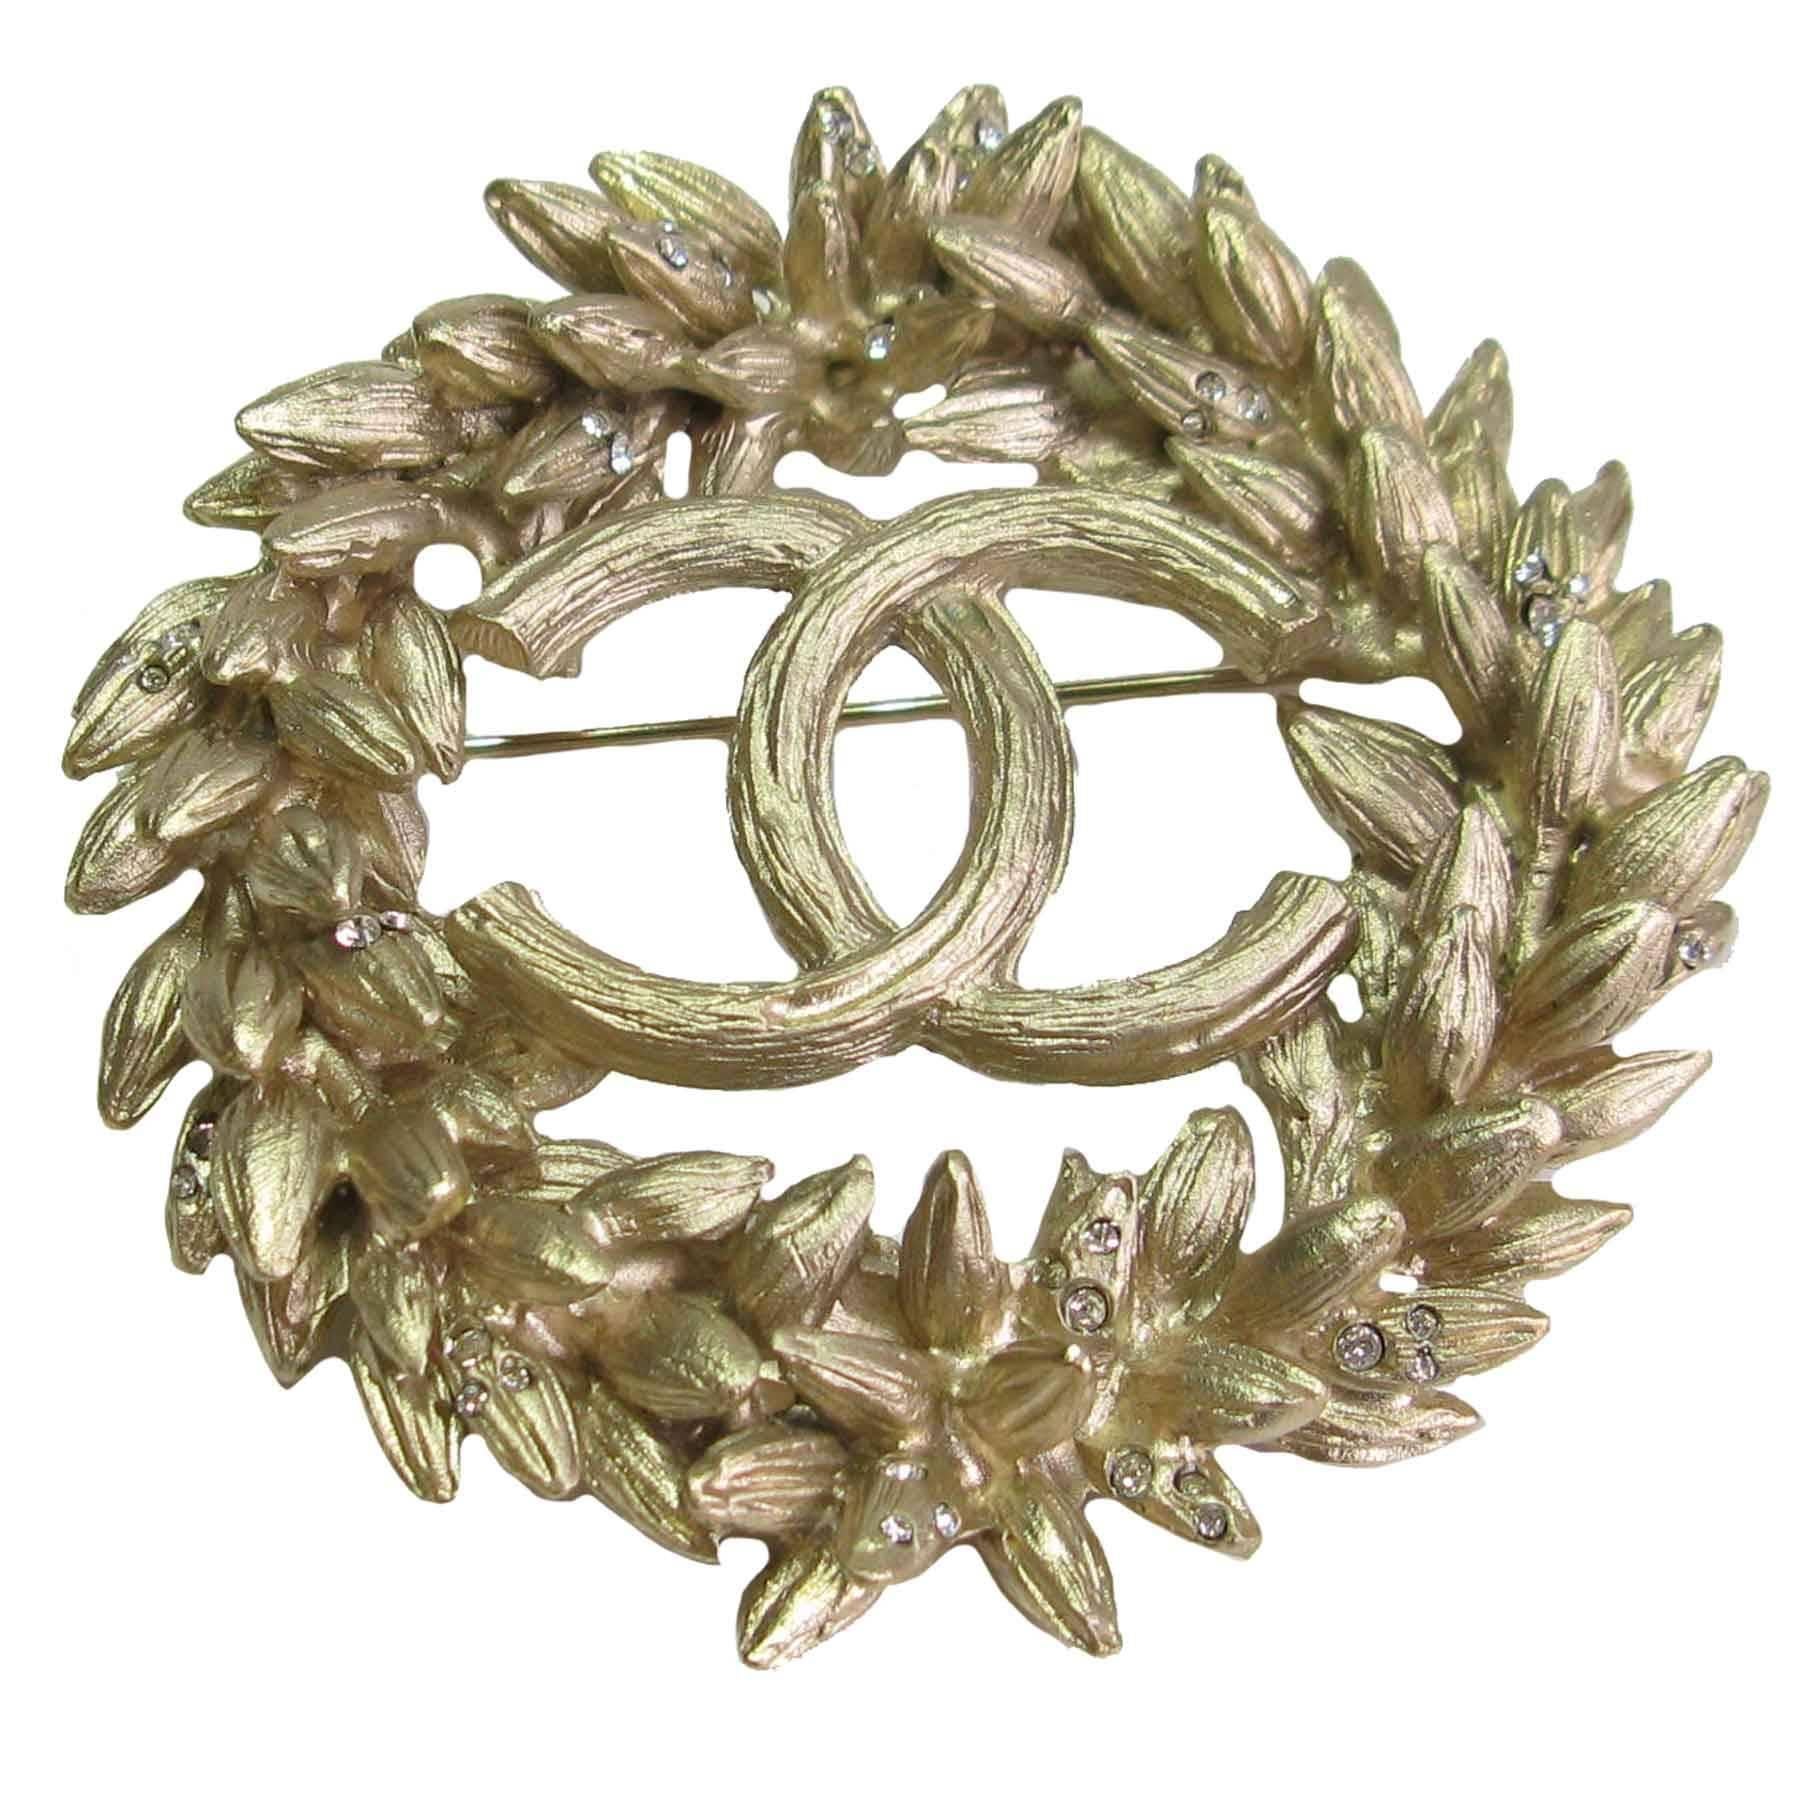 Magnificent brooch Chanel, ear of wheat, in gilt métal, color : matte gold, with small rhinestones all around. A beautiful CC is in the center.

Hologram of the brand on the back of the CC. Never worn.

Dimensions: 7 cm diameter

Delivered in a